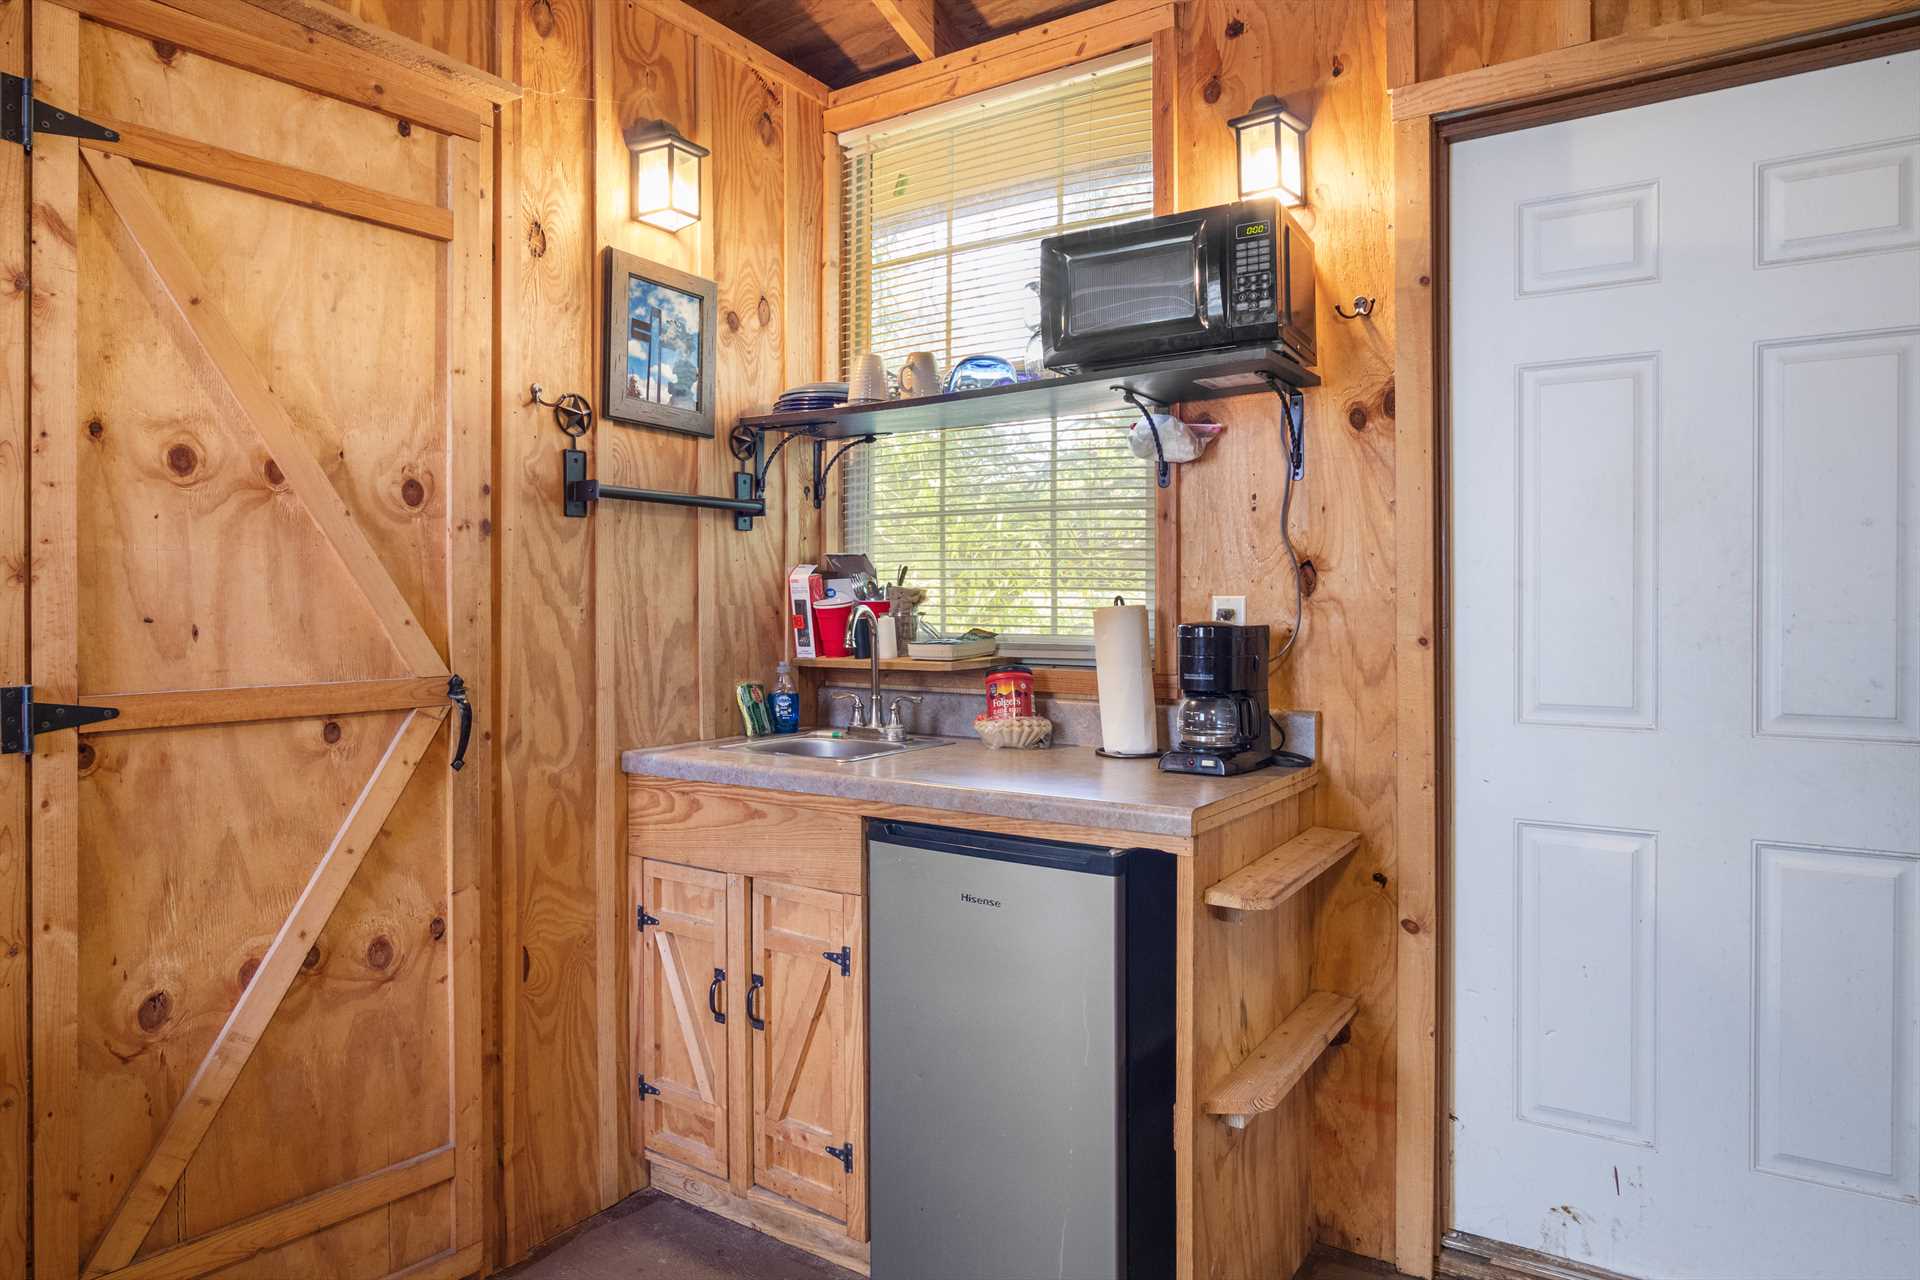                                                 Your cozy kitchenette includes a mini-fridge, microwave, and coffee maker...and don't forget Kerrville is close by, too!